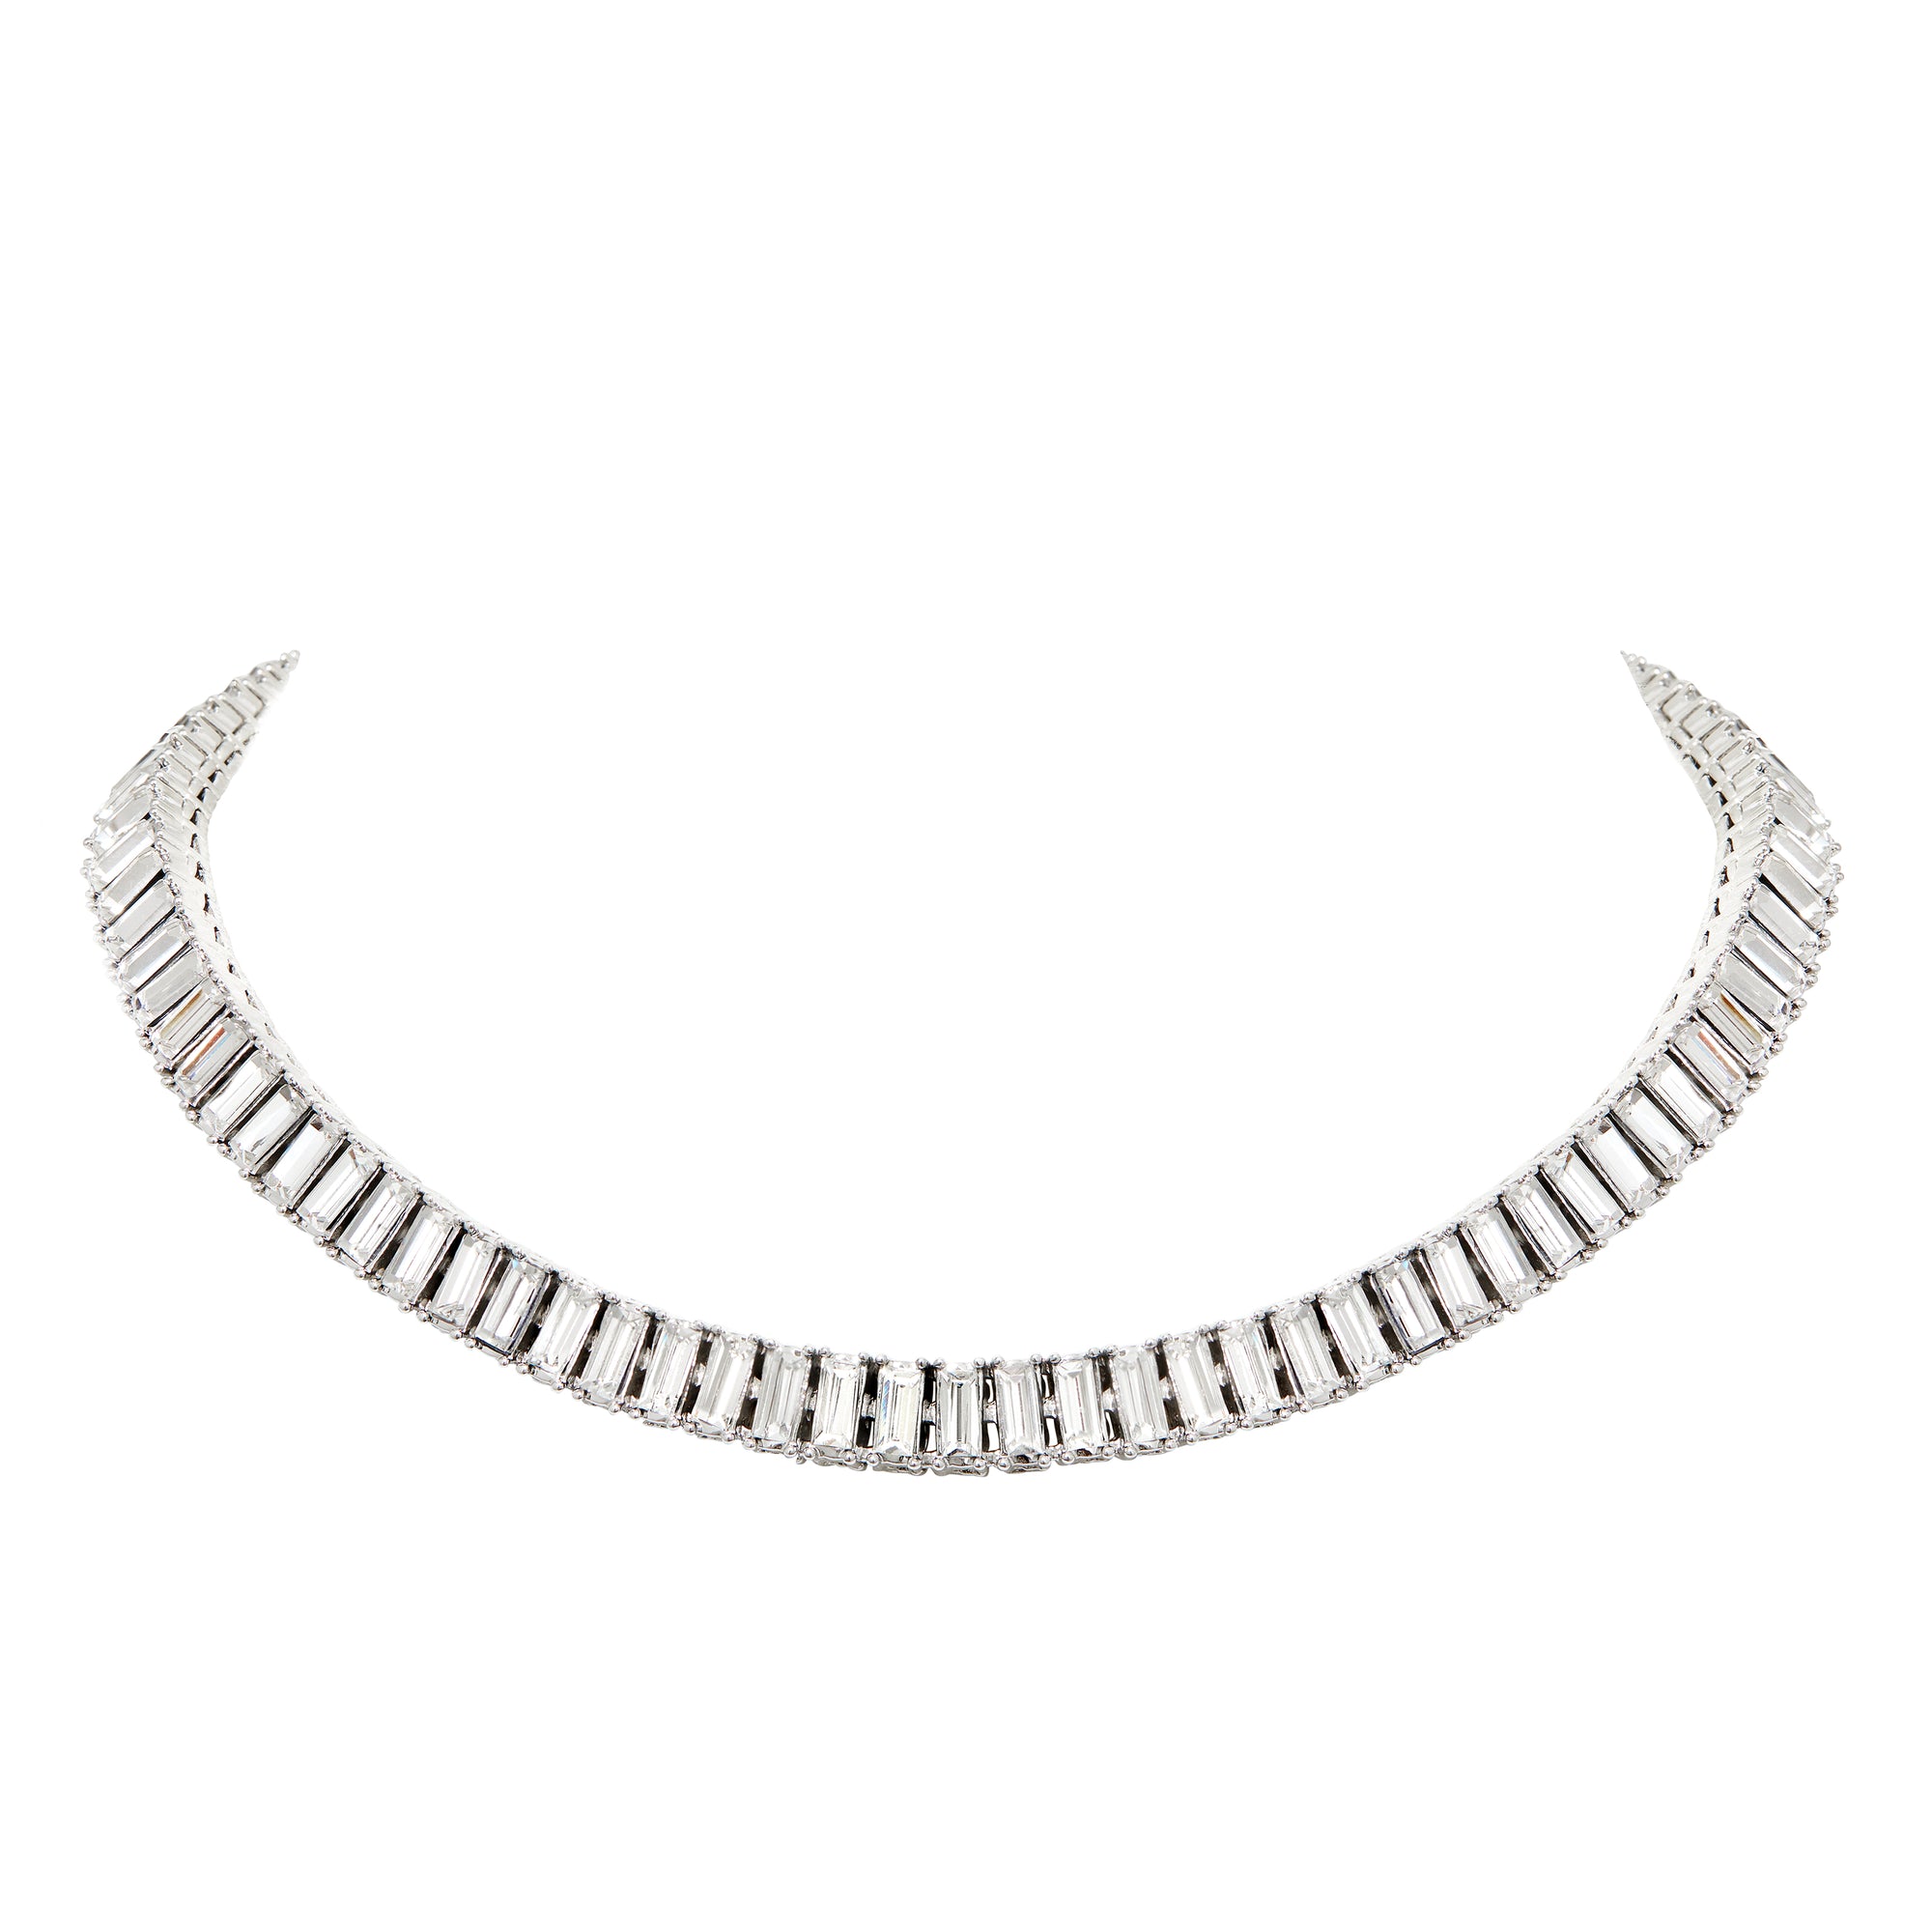 The FALLON Baguette Swag Collar Necklace.  Rhodium-plated brass, cubic zirconia stones.